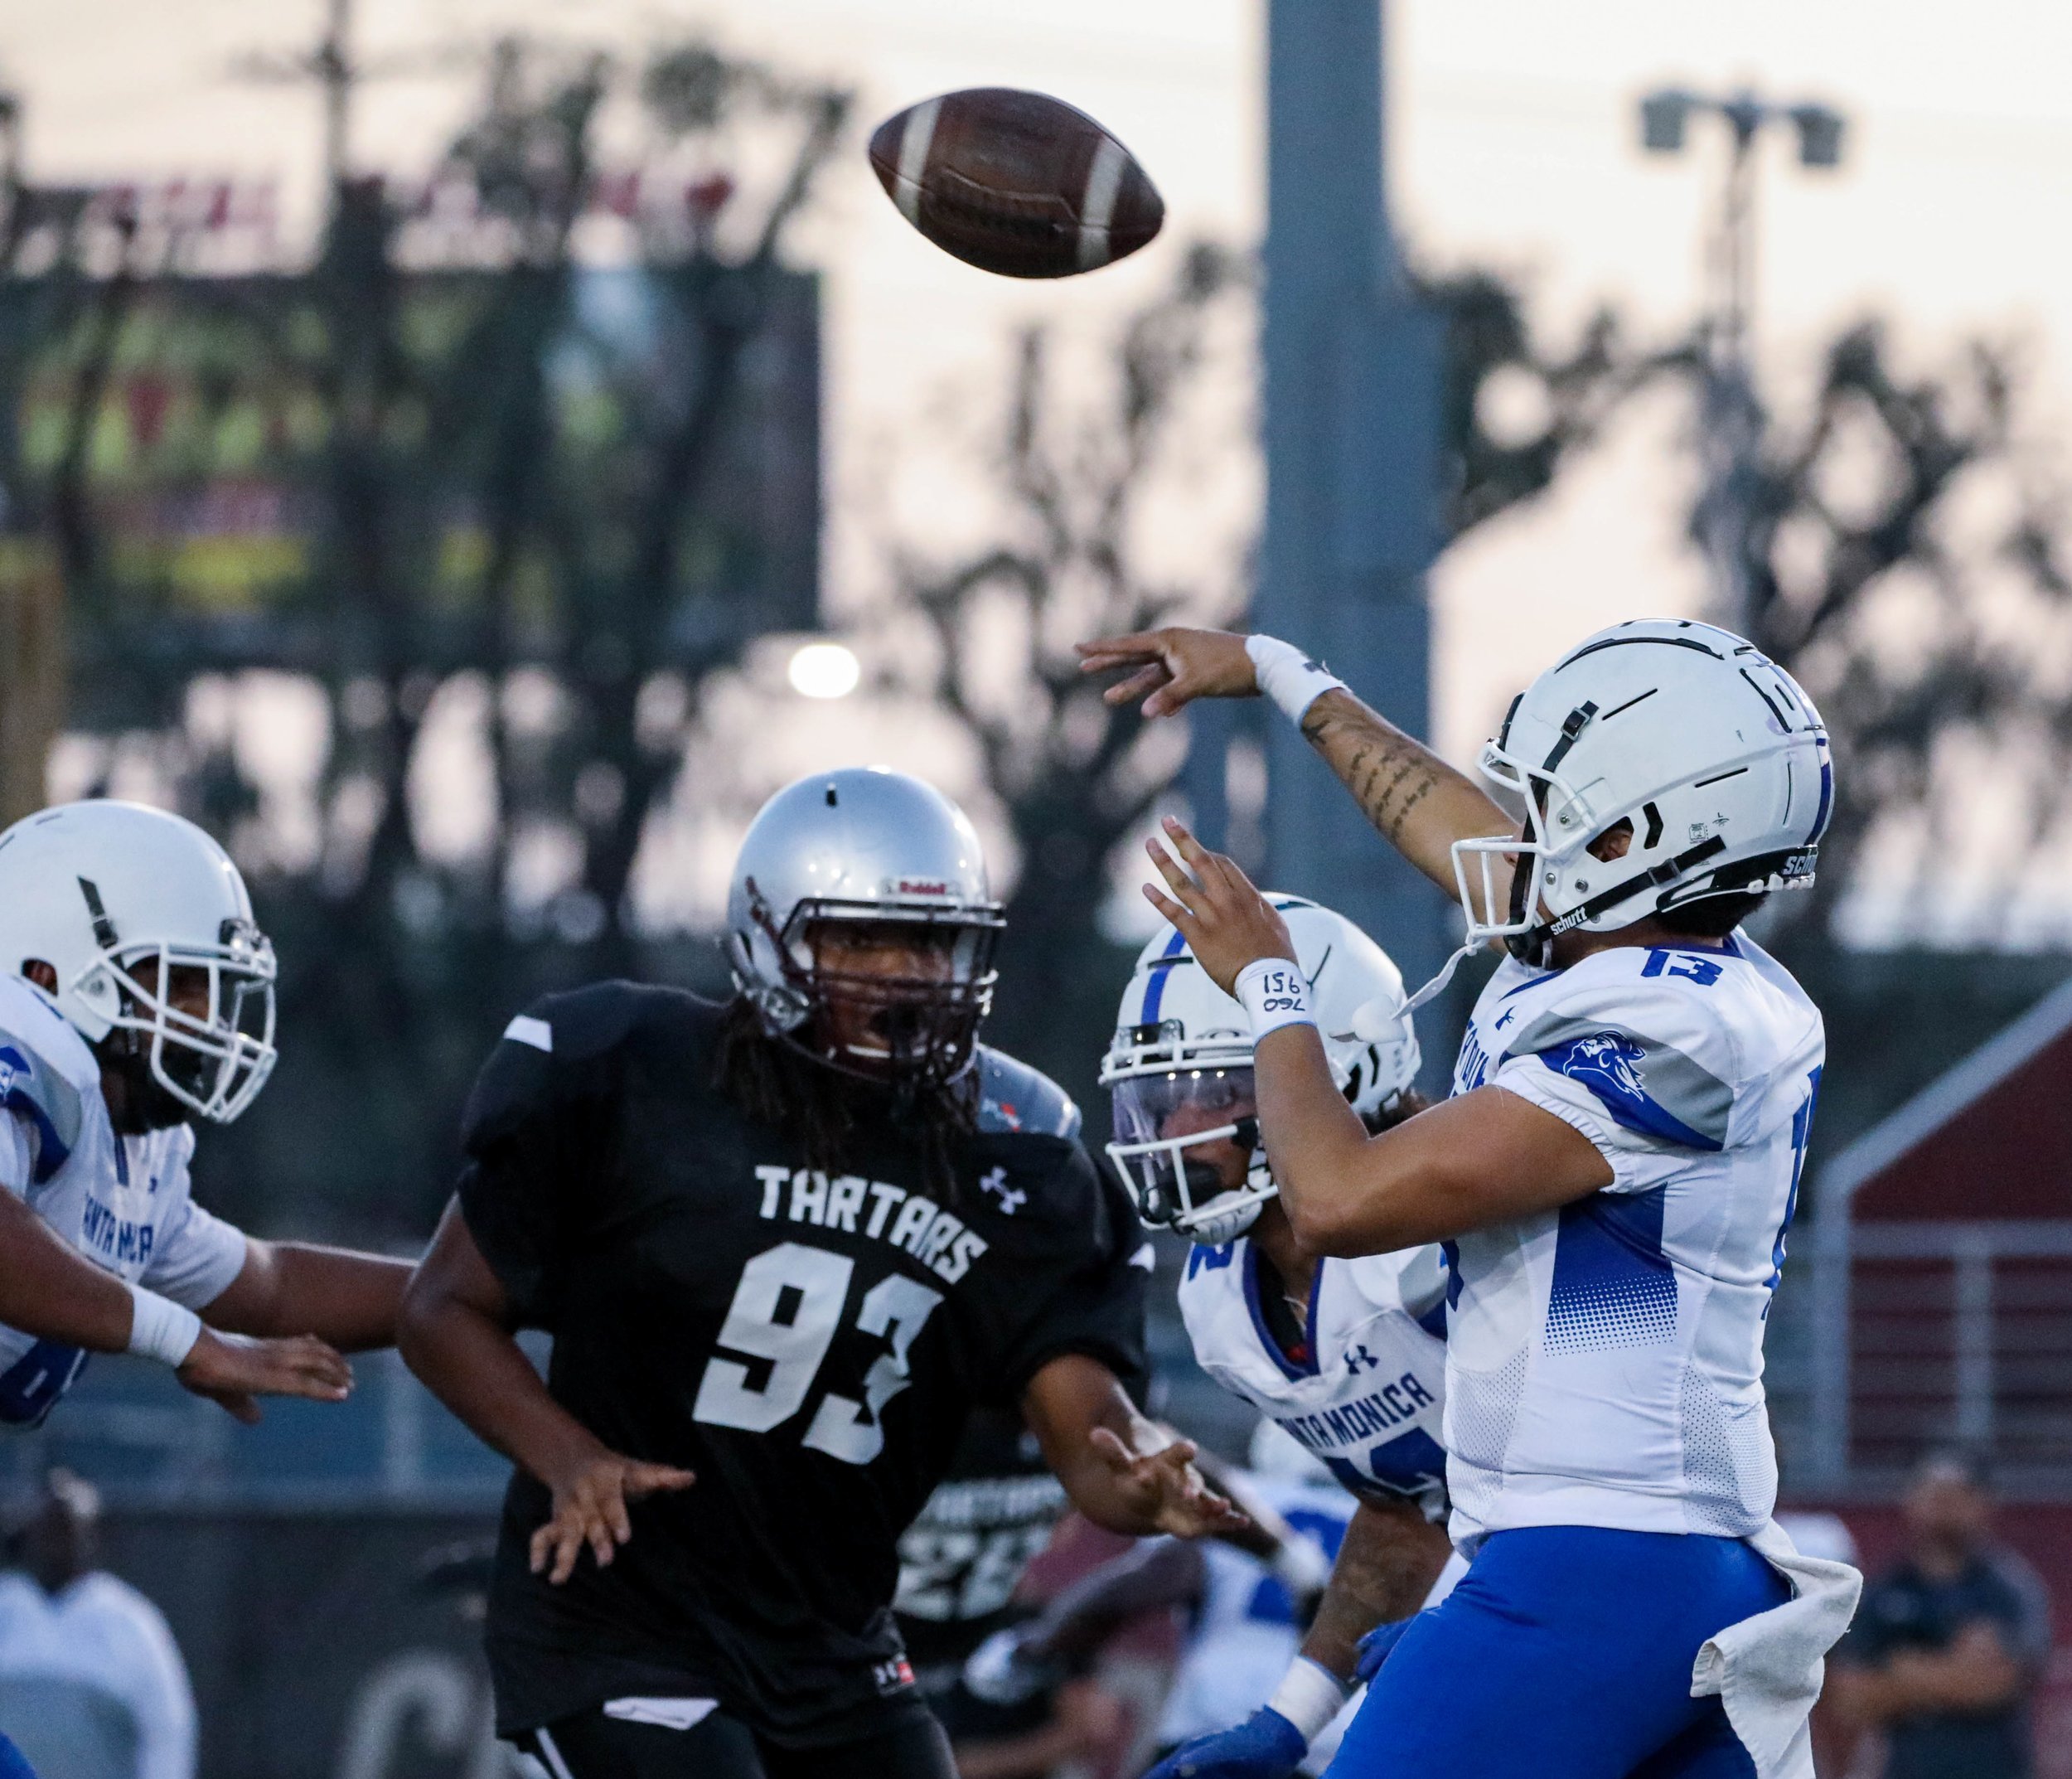  Santa Monica College Quarterback Michael Cruz (13, R) getting rid of the ball as he is rushed from oncoming Defensive player Alonzo Brand (93, L) from the Compton College Tartar rushes towards Cruz on Saturday, Sept. 17 at Compton, Calif. (Danilo Pe